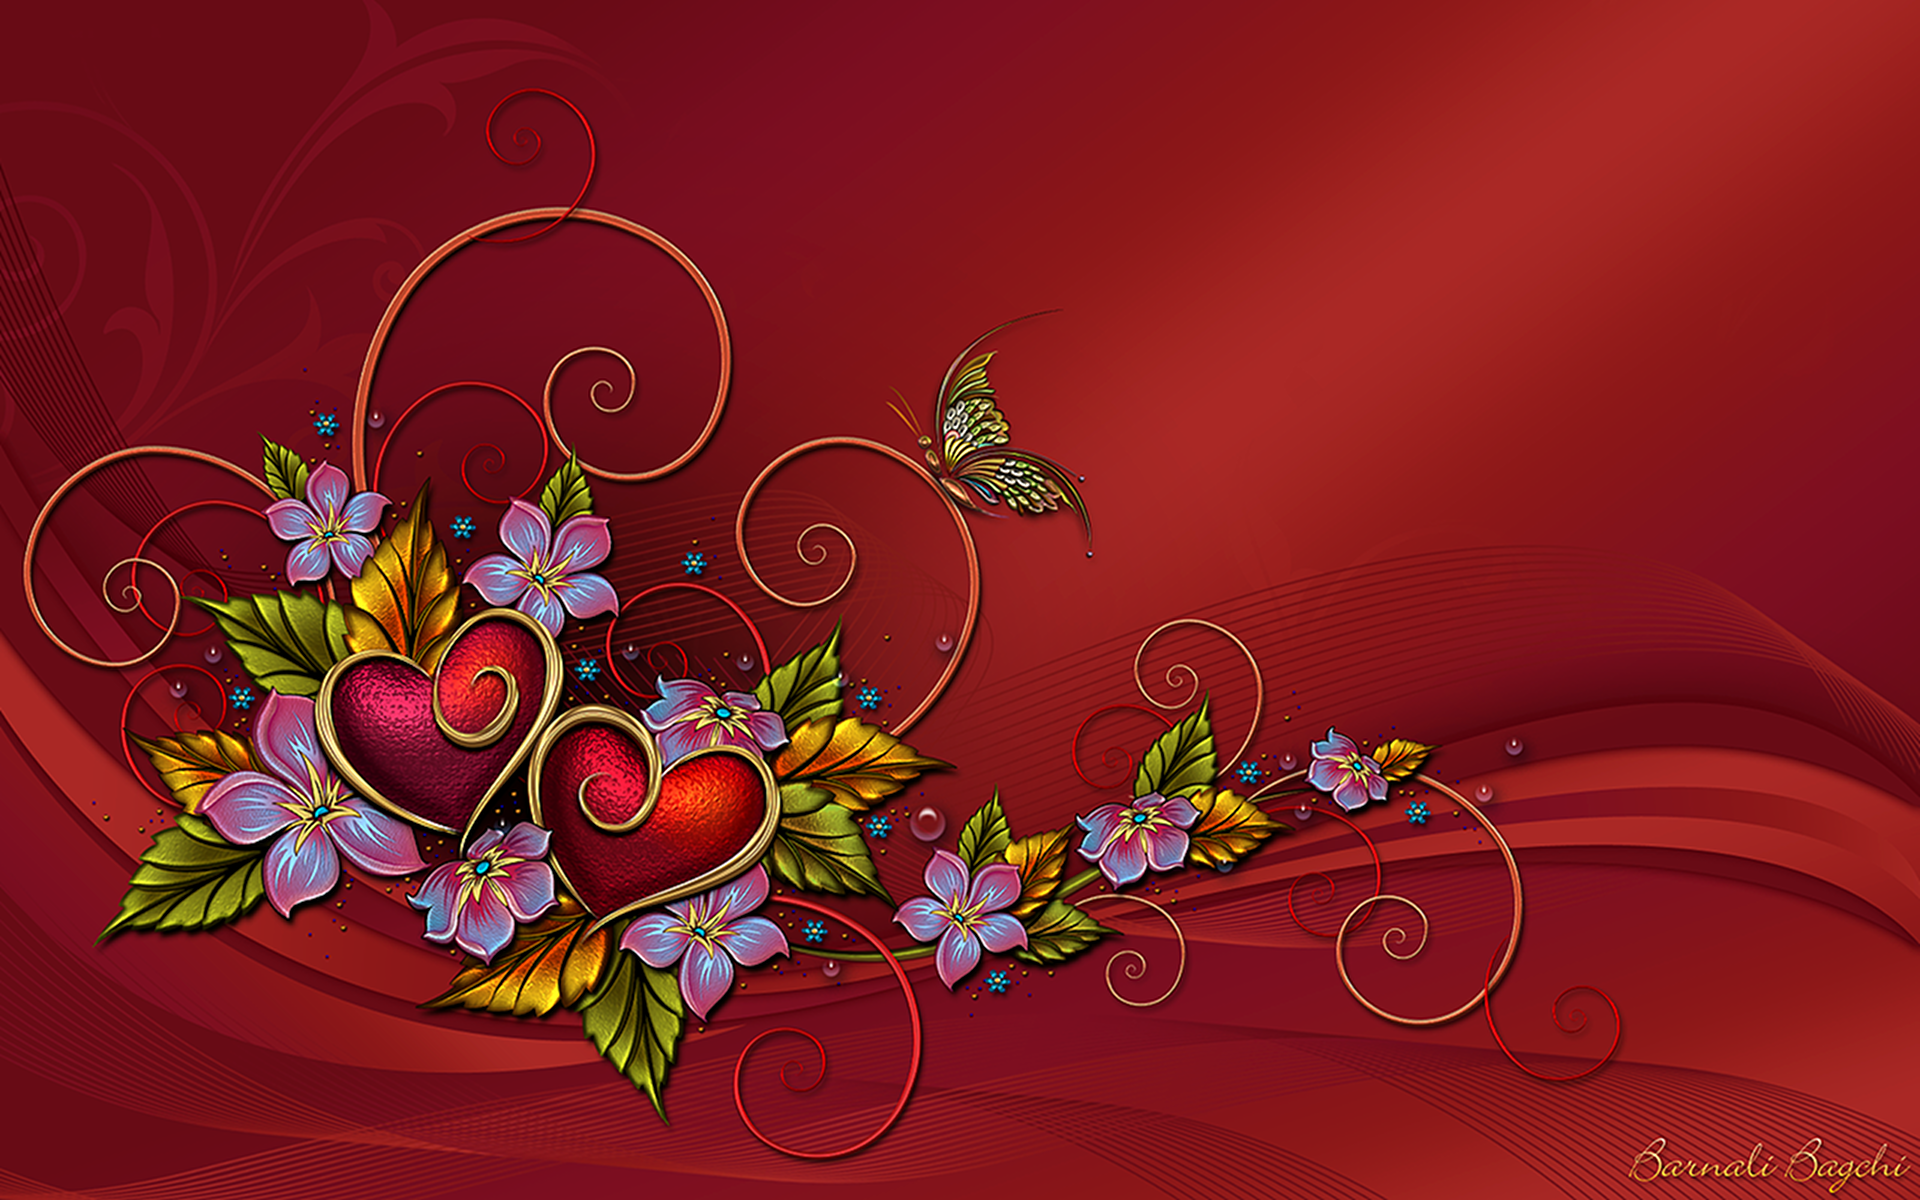 Hearts, Flowers, and Butterfly by Barnali Bagchi